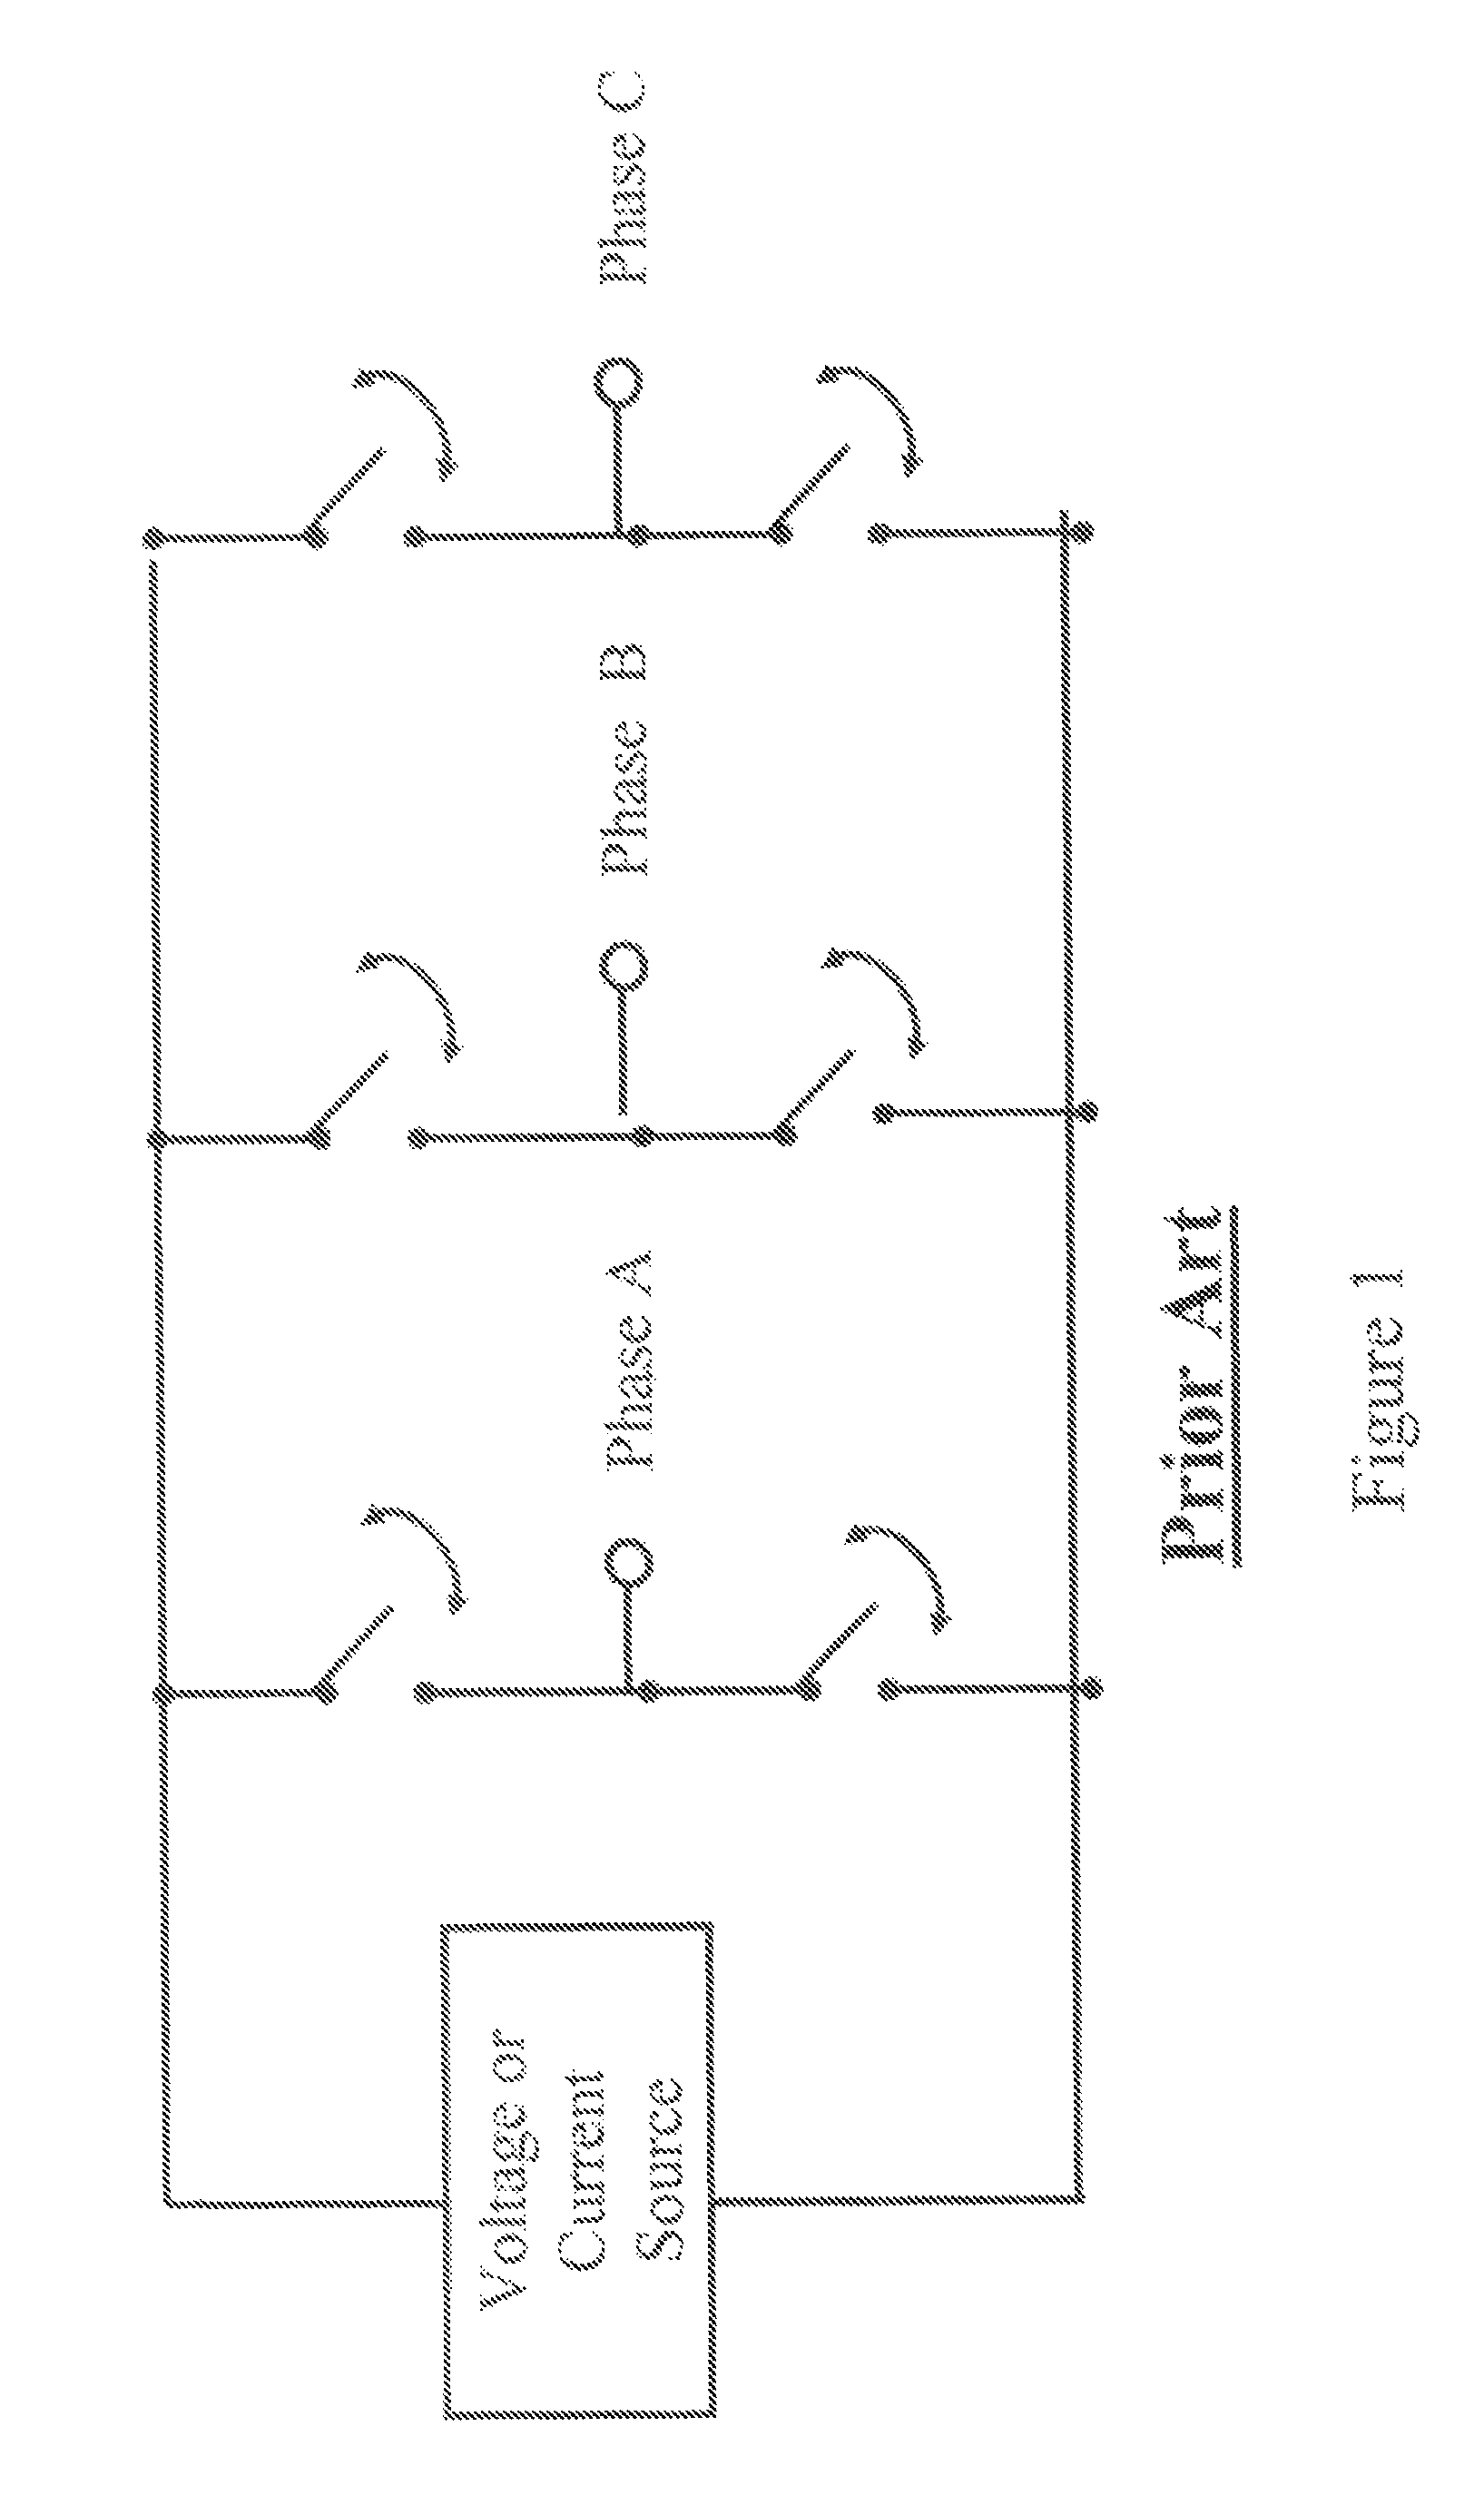 Optically controlled silicon carbide and related wide-bandgap transistors and thyristors